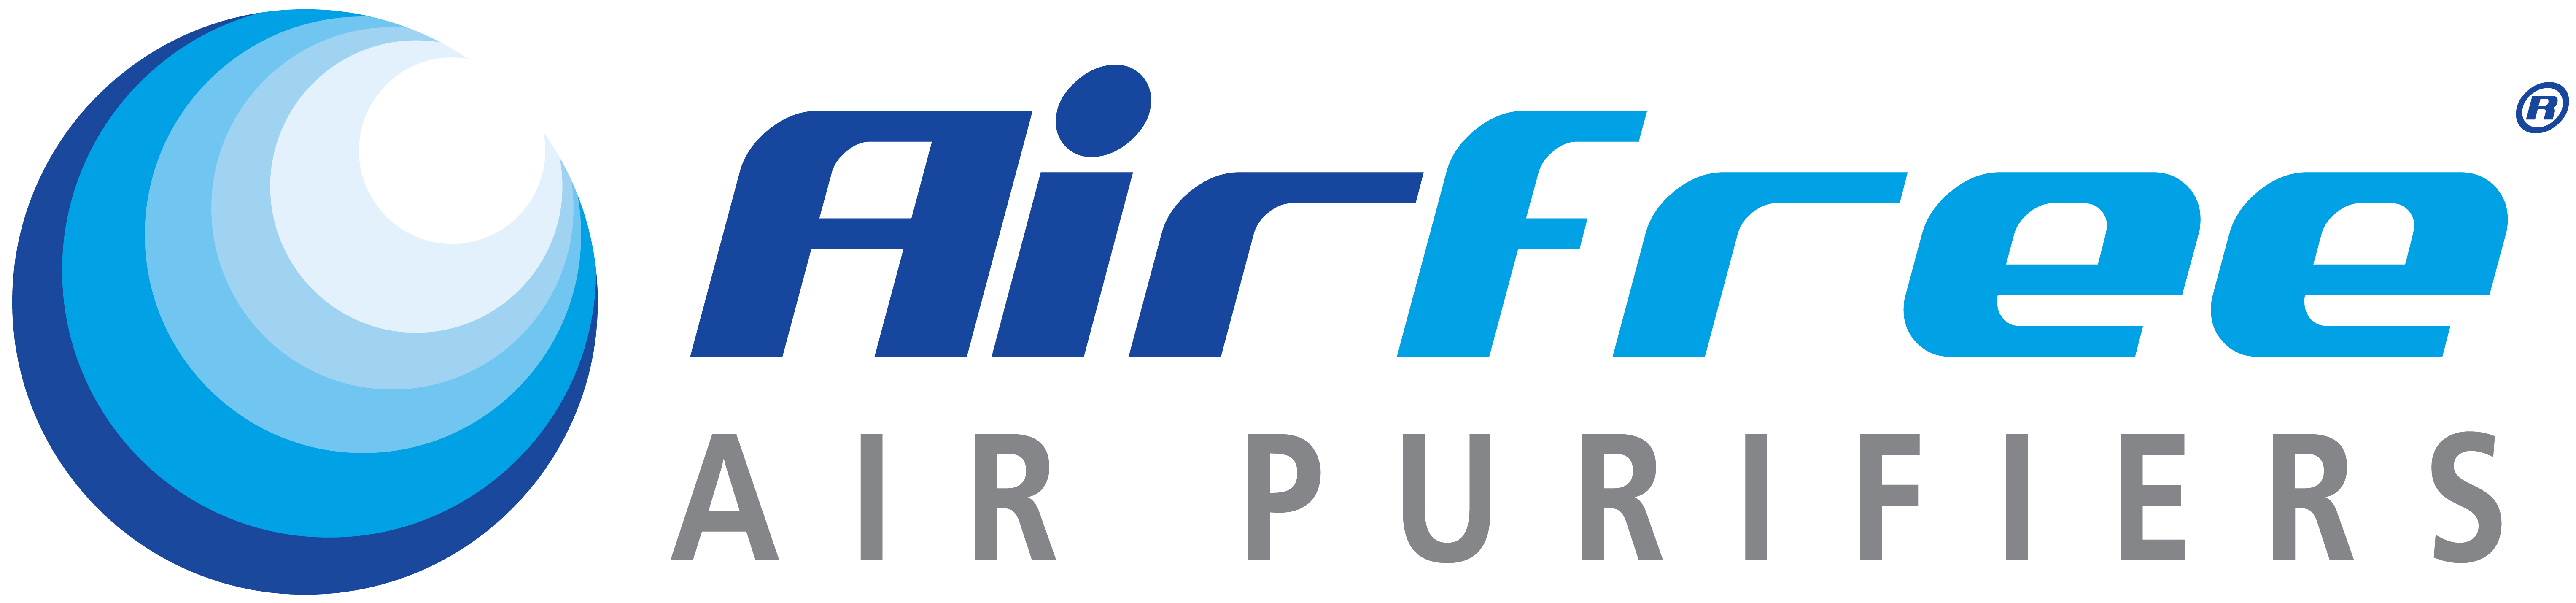 Airfree Air Purifiers, the natural solution for asthma, allergies, mold and contaminated air